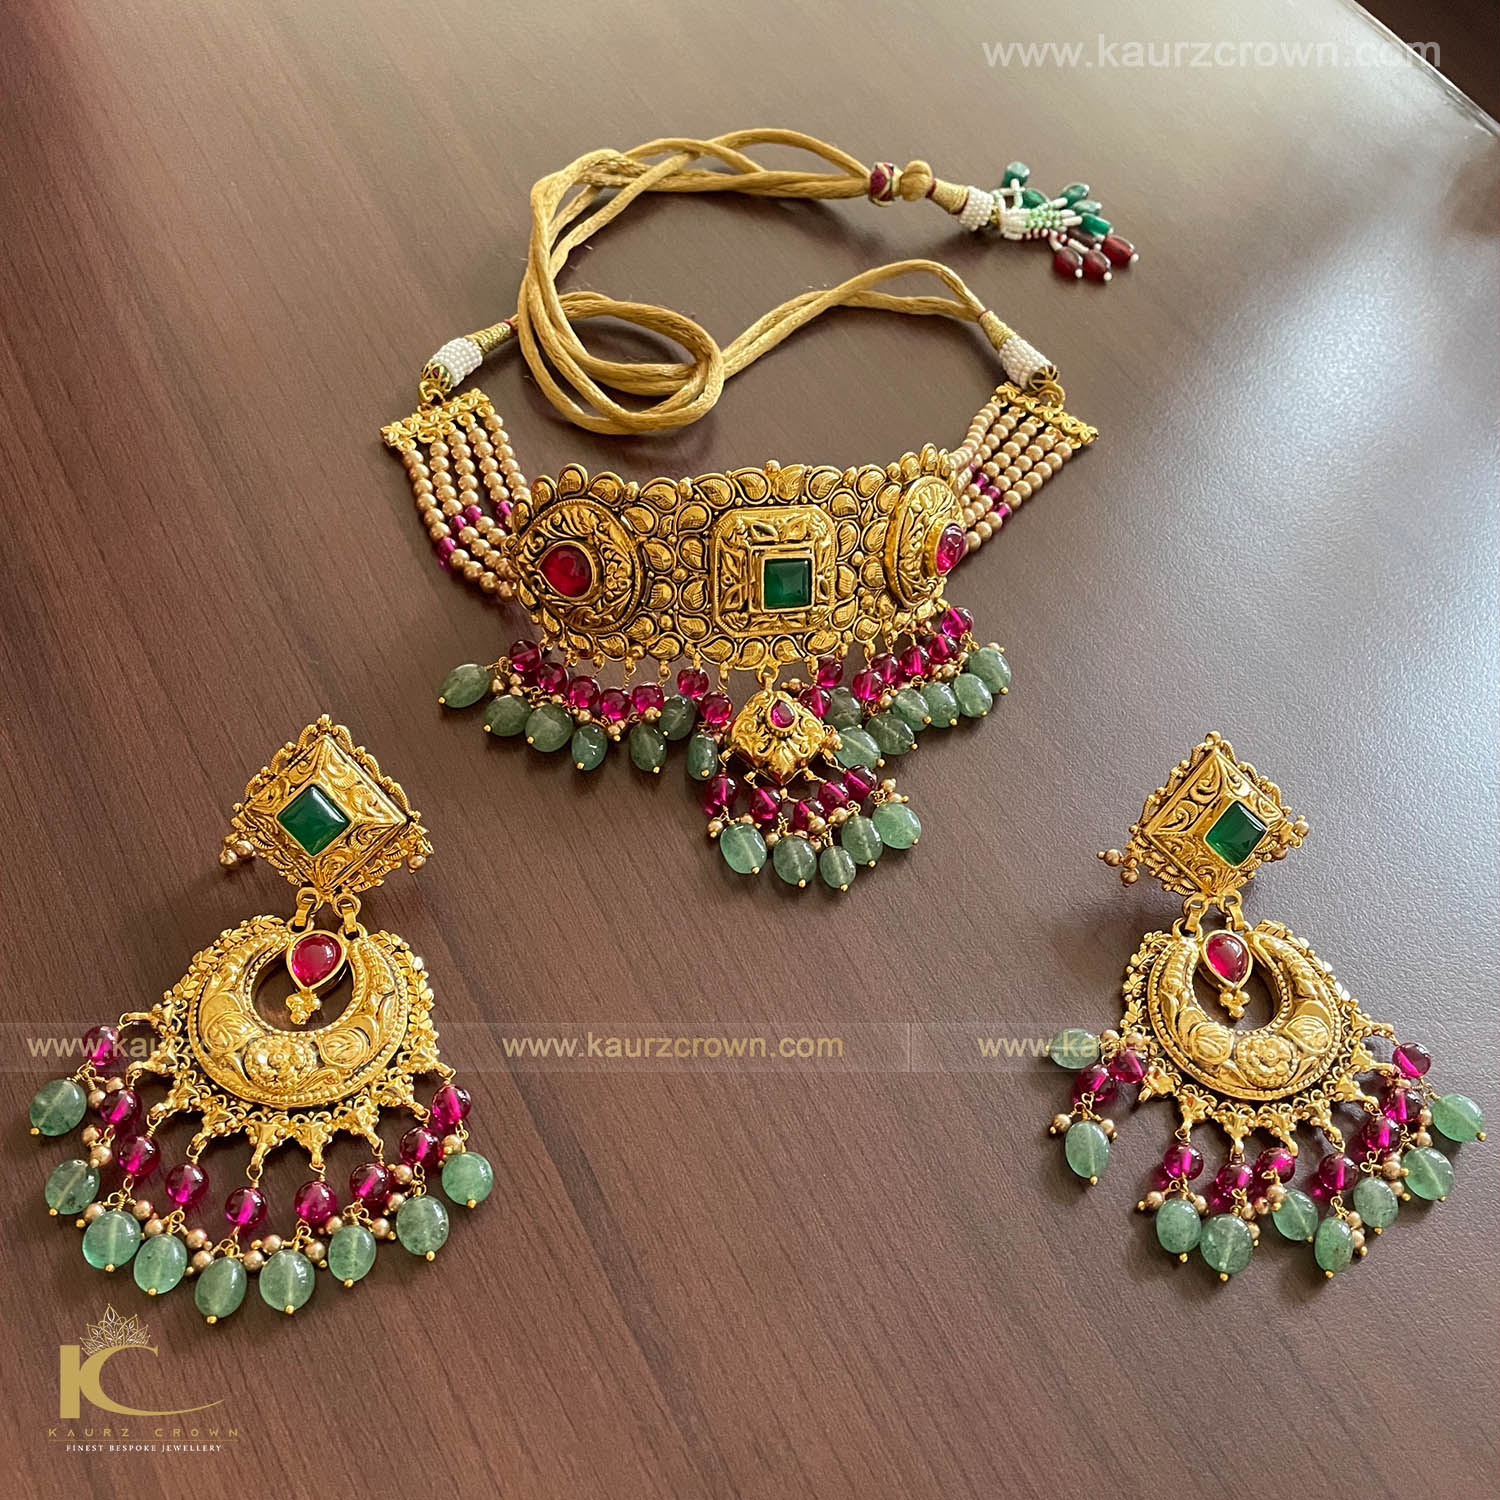 Surmai Traditional Antique Gold Plated Tikka , Tikka , Surmai , gold plated , set , jewellery , kaurz crown